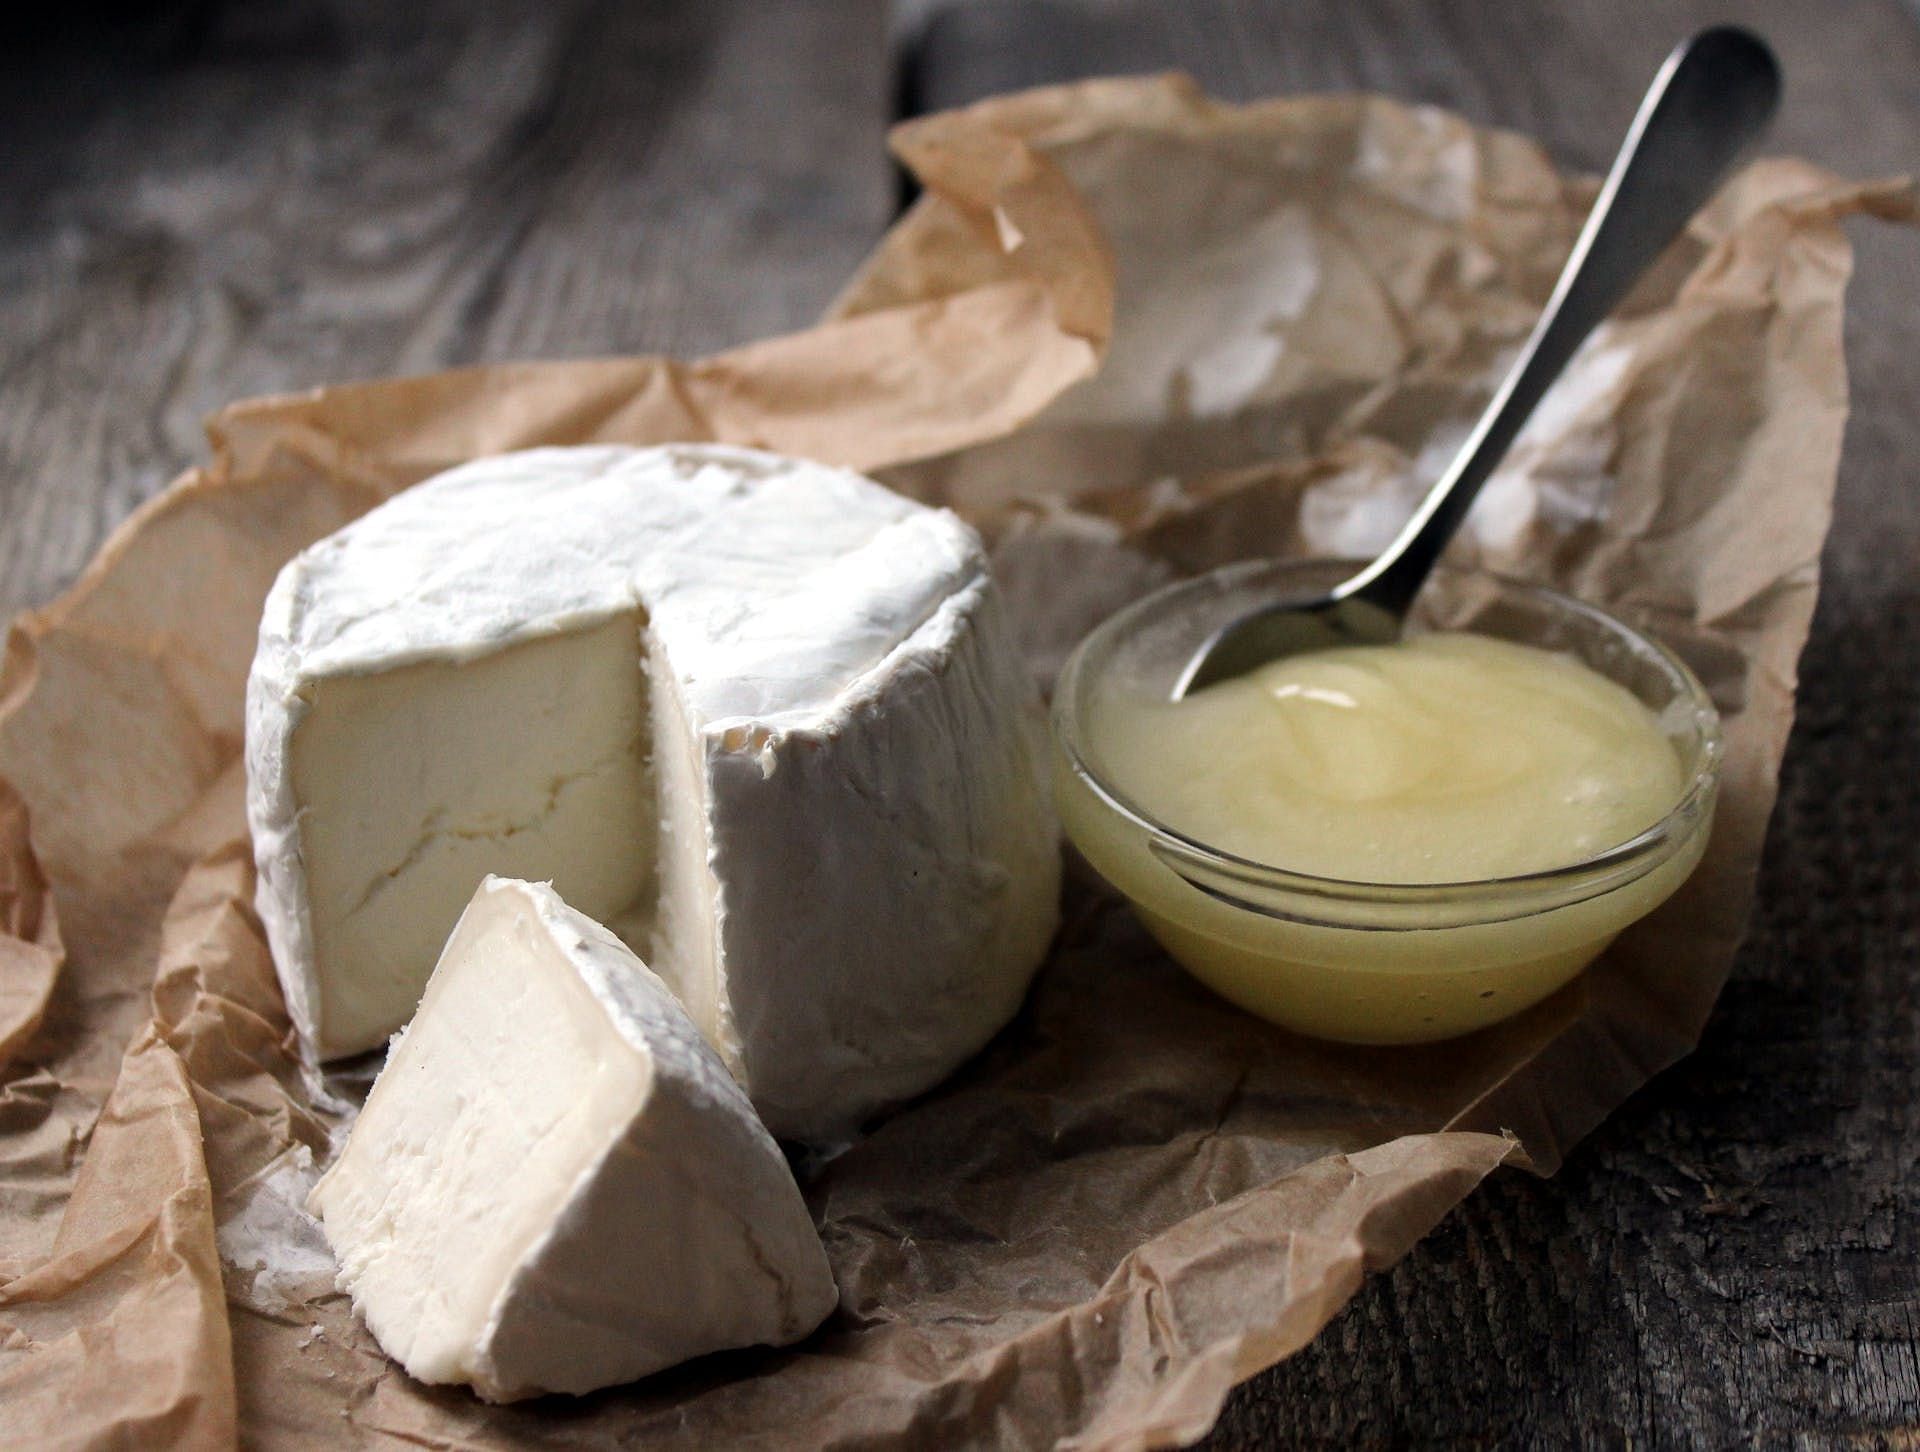 Dairy products are foods to avoid with PCOS. (Image via Pexels/Irita Antonevica)